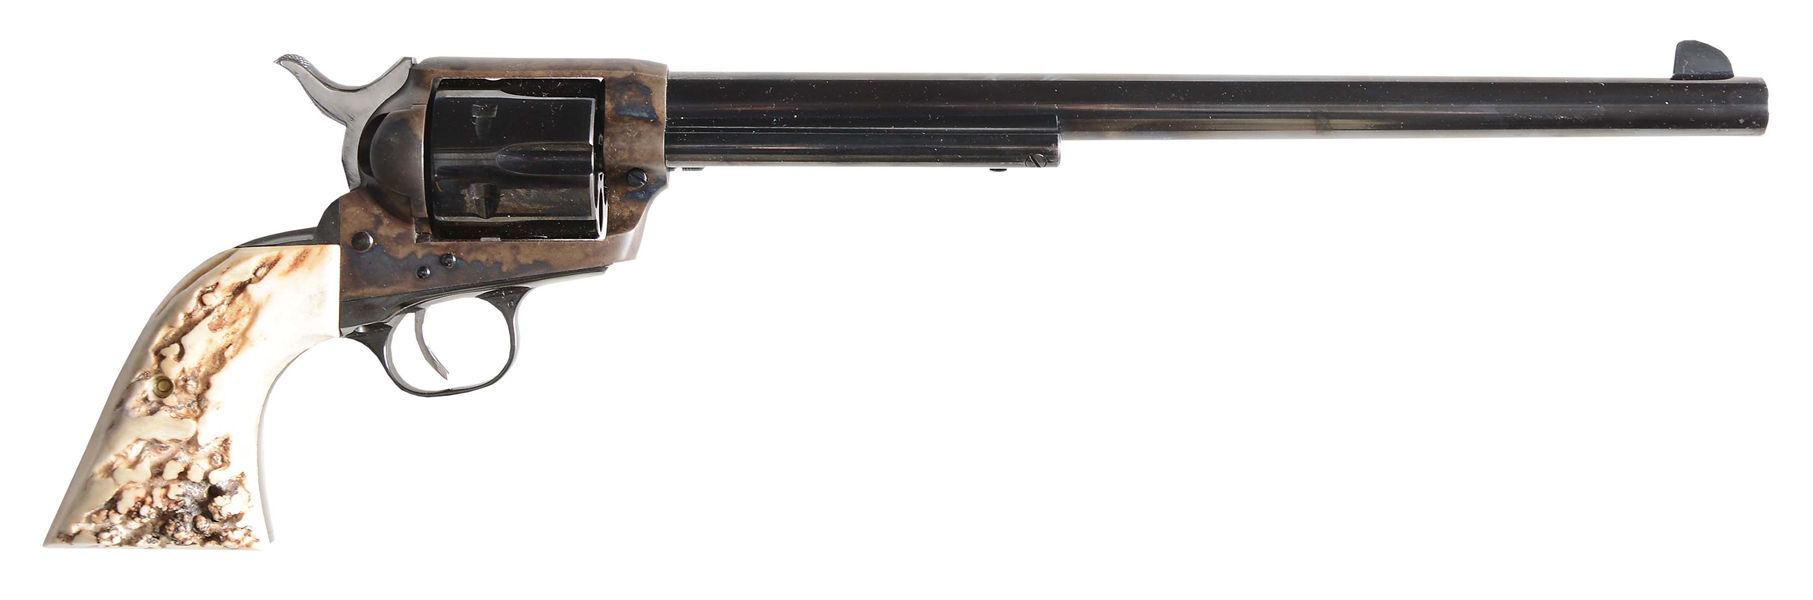 (C) COLT 2ND GENERATION BUNTLINE SINGLE ACTION ARMY REVOLVER WITH MEXICAN HOLSTER AND BELT (1958).